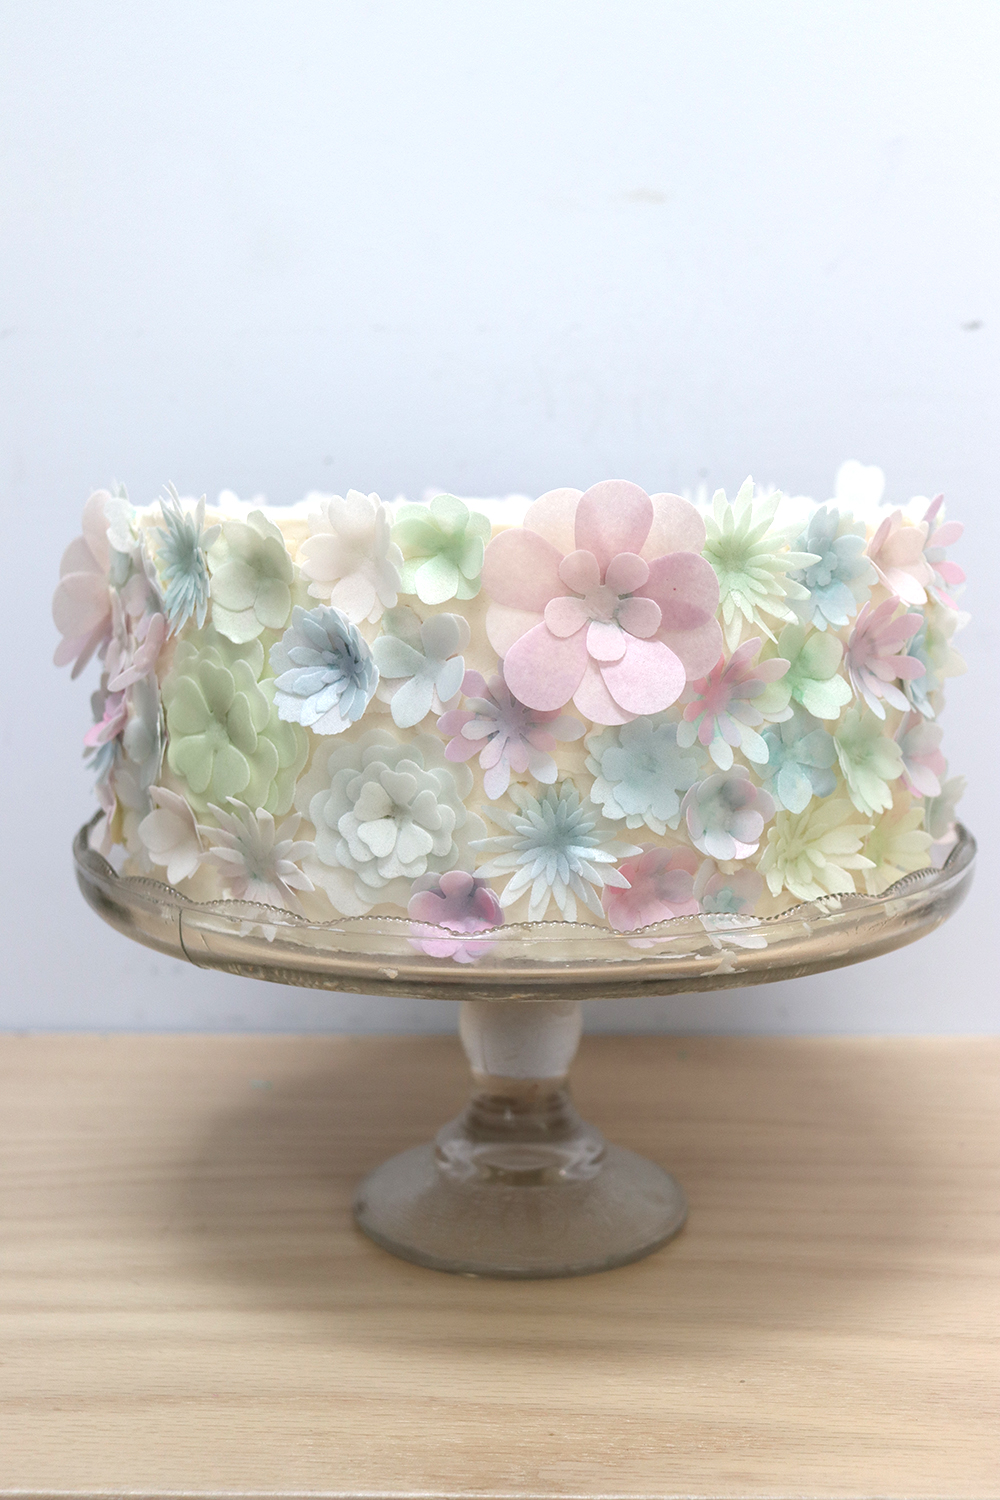 Make Over A Clearance Cake With Edible Flowers - Dream Green DIY